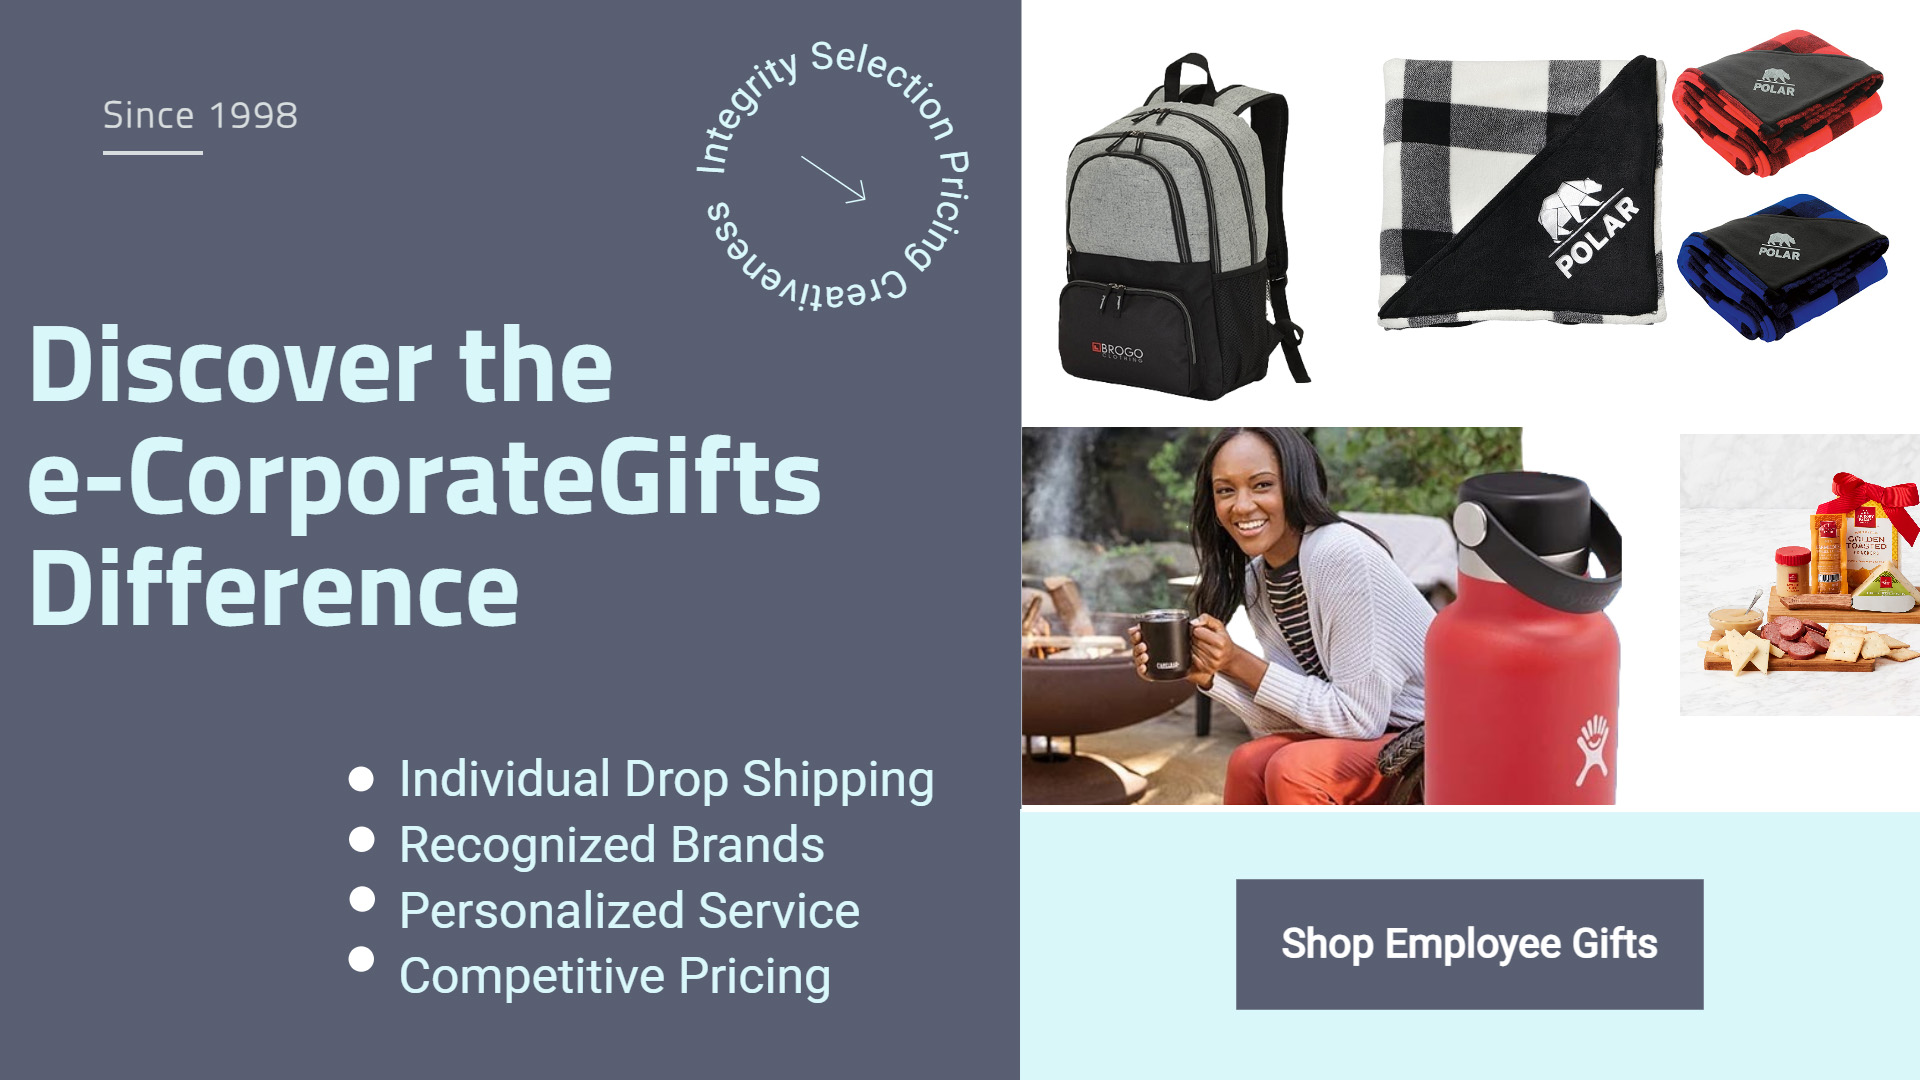 Best 15 Business Gifts Under $25  Employee Appreciation for the Holidays